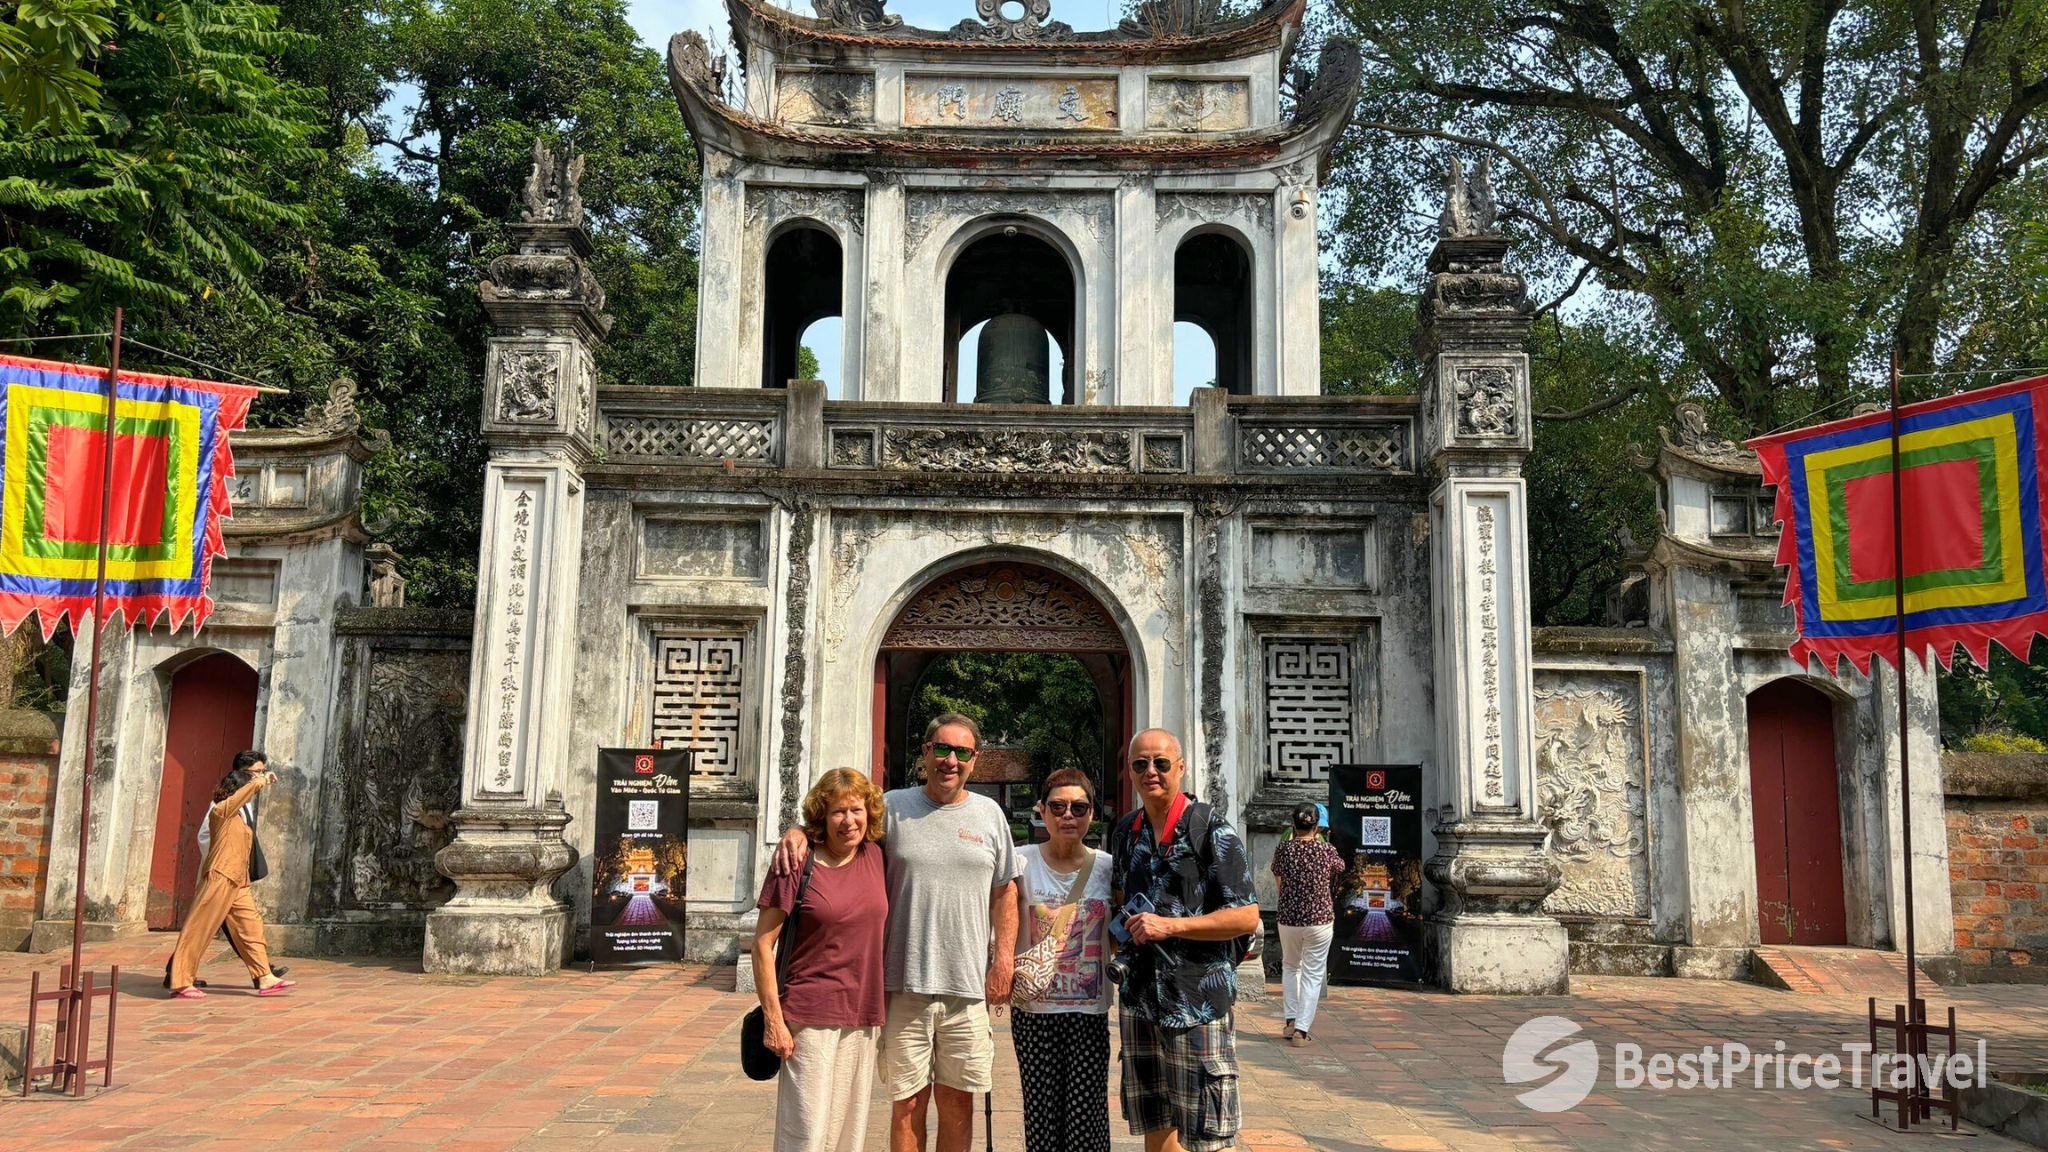 Day 2 Explore The History Of Vietnam In Temple Of Literature